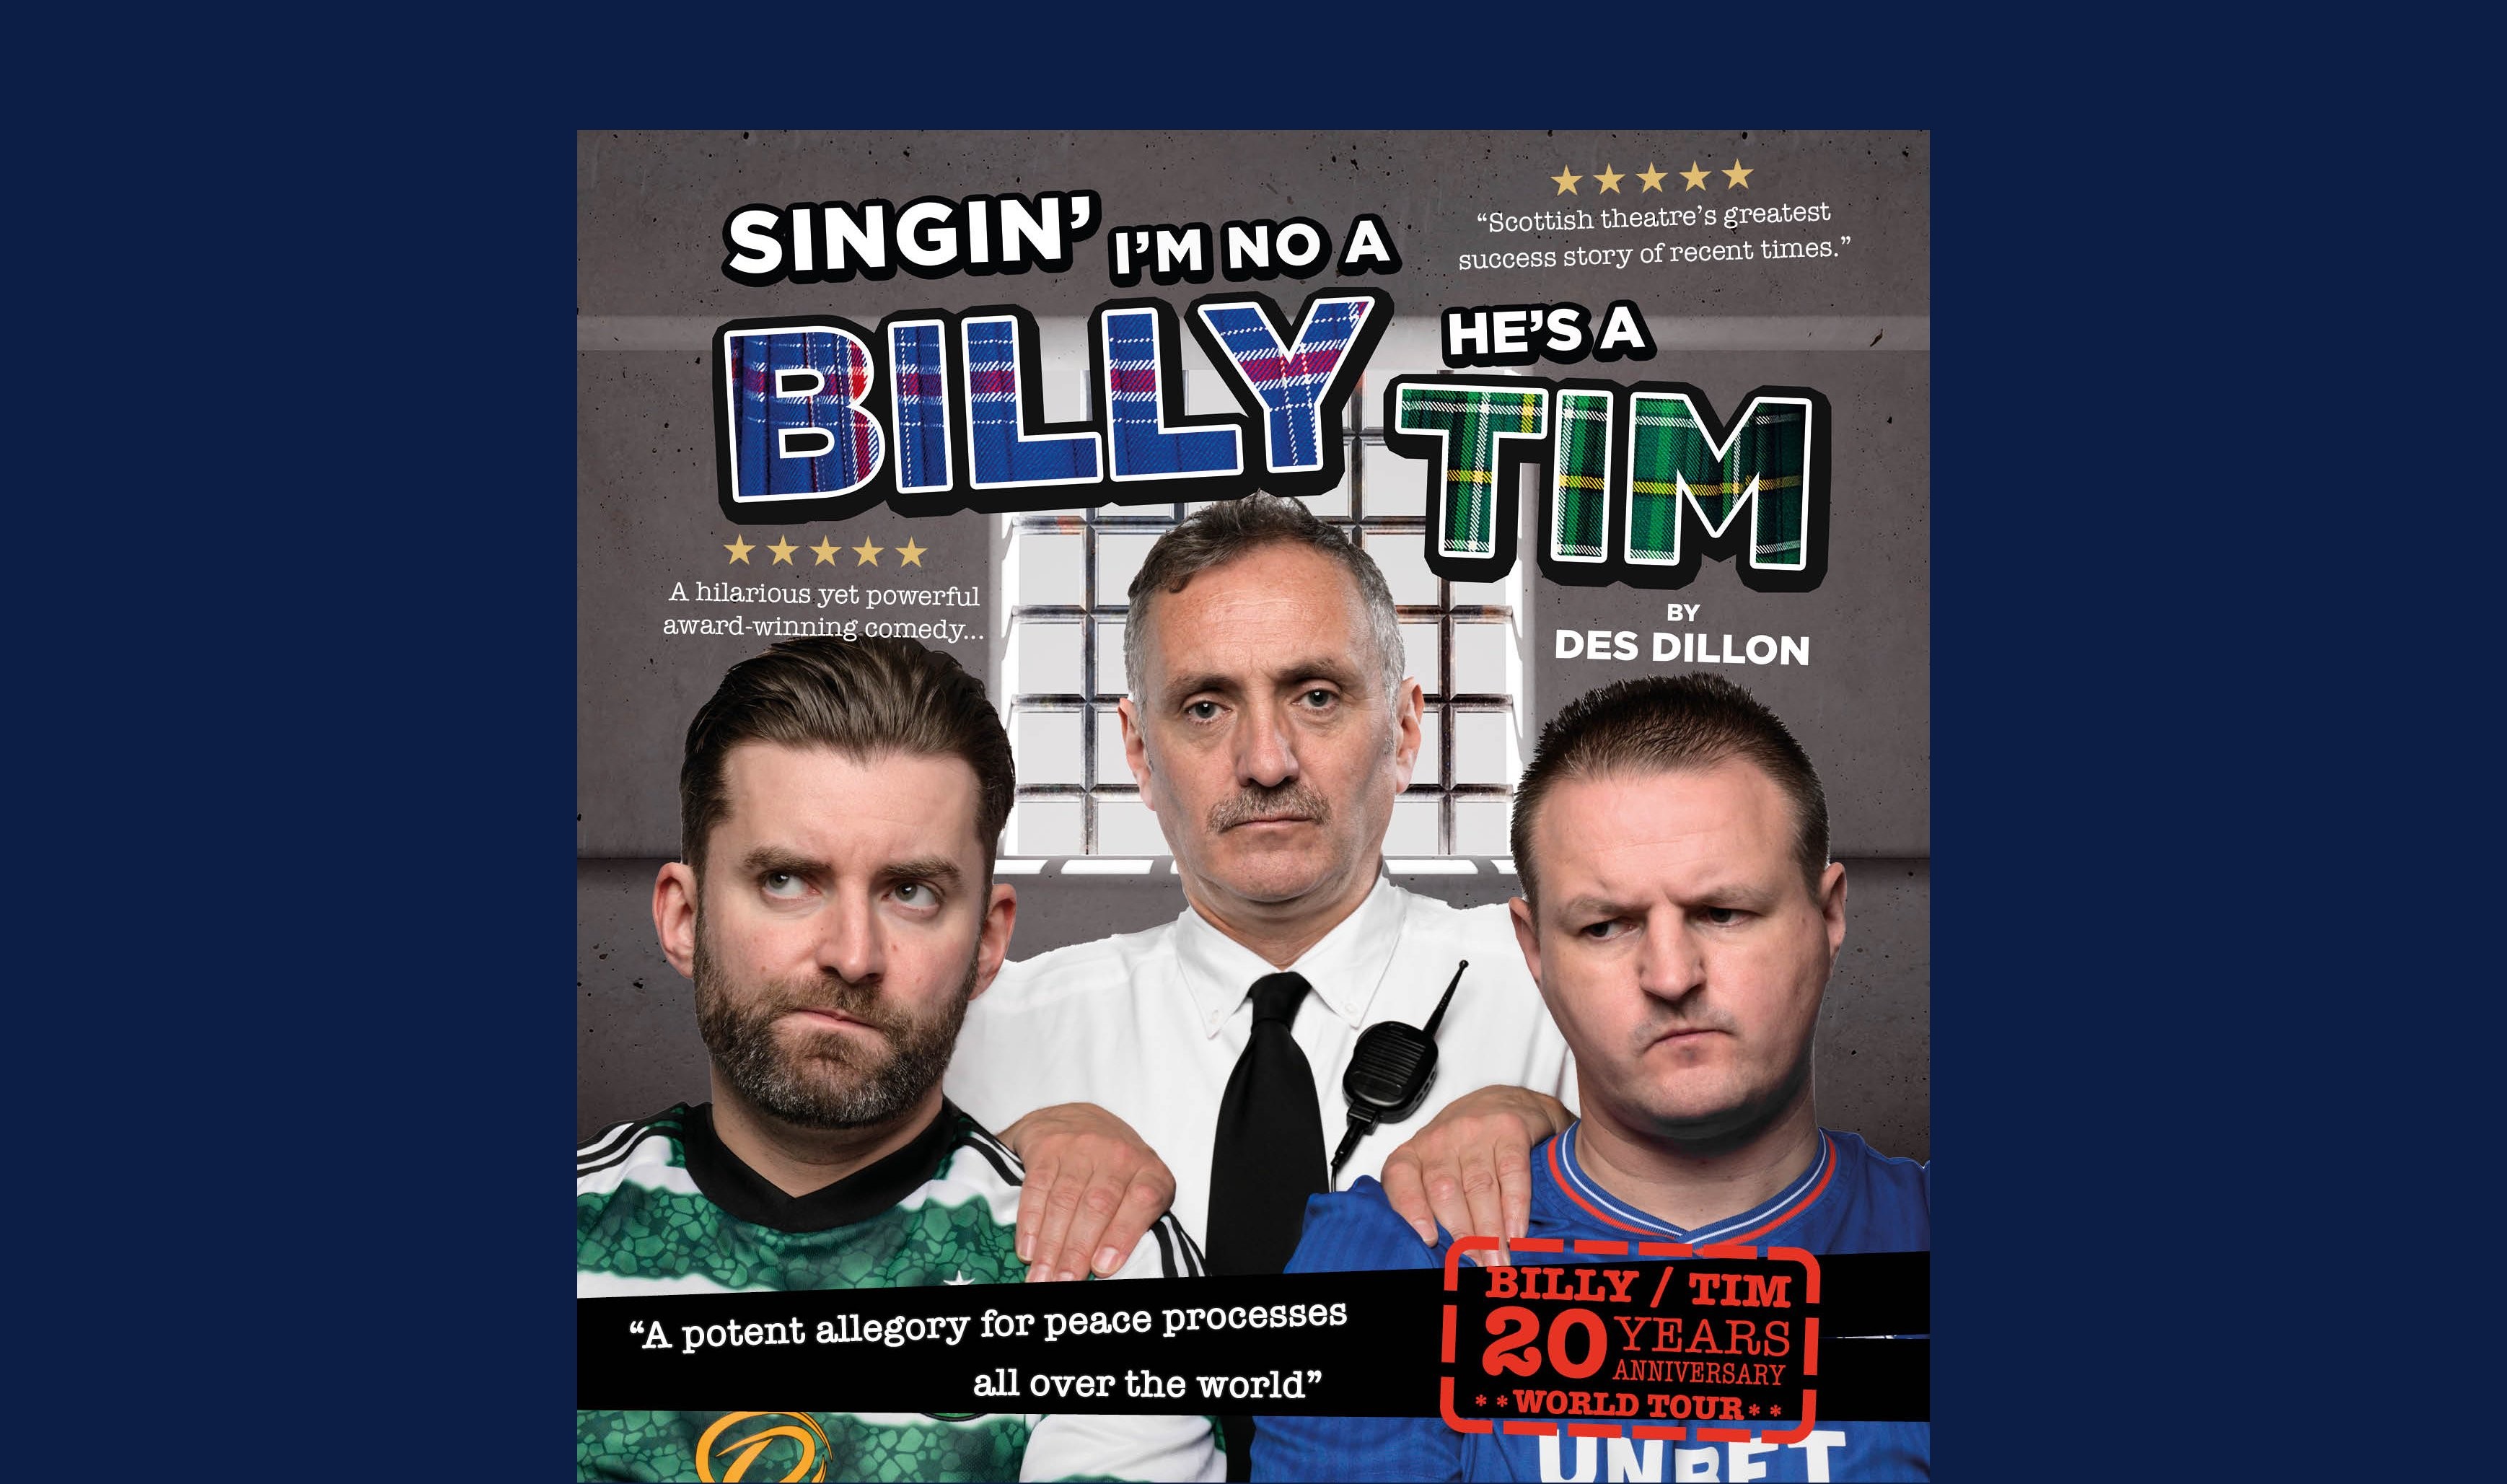 SINGIN’ I’M NO A BILLY HE’S A TIM - 20TH ANNIVERSARY TOUR at Stewarton Area Centre